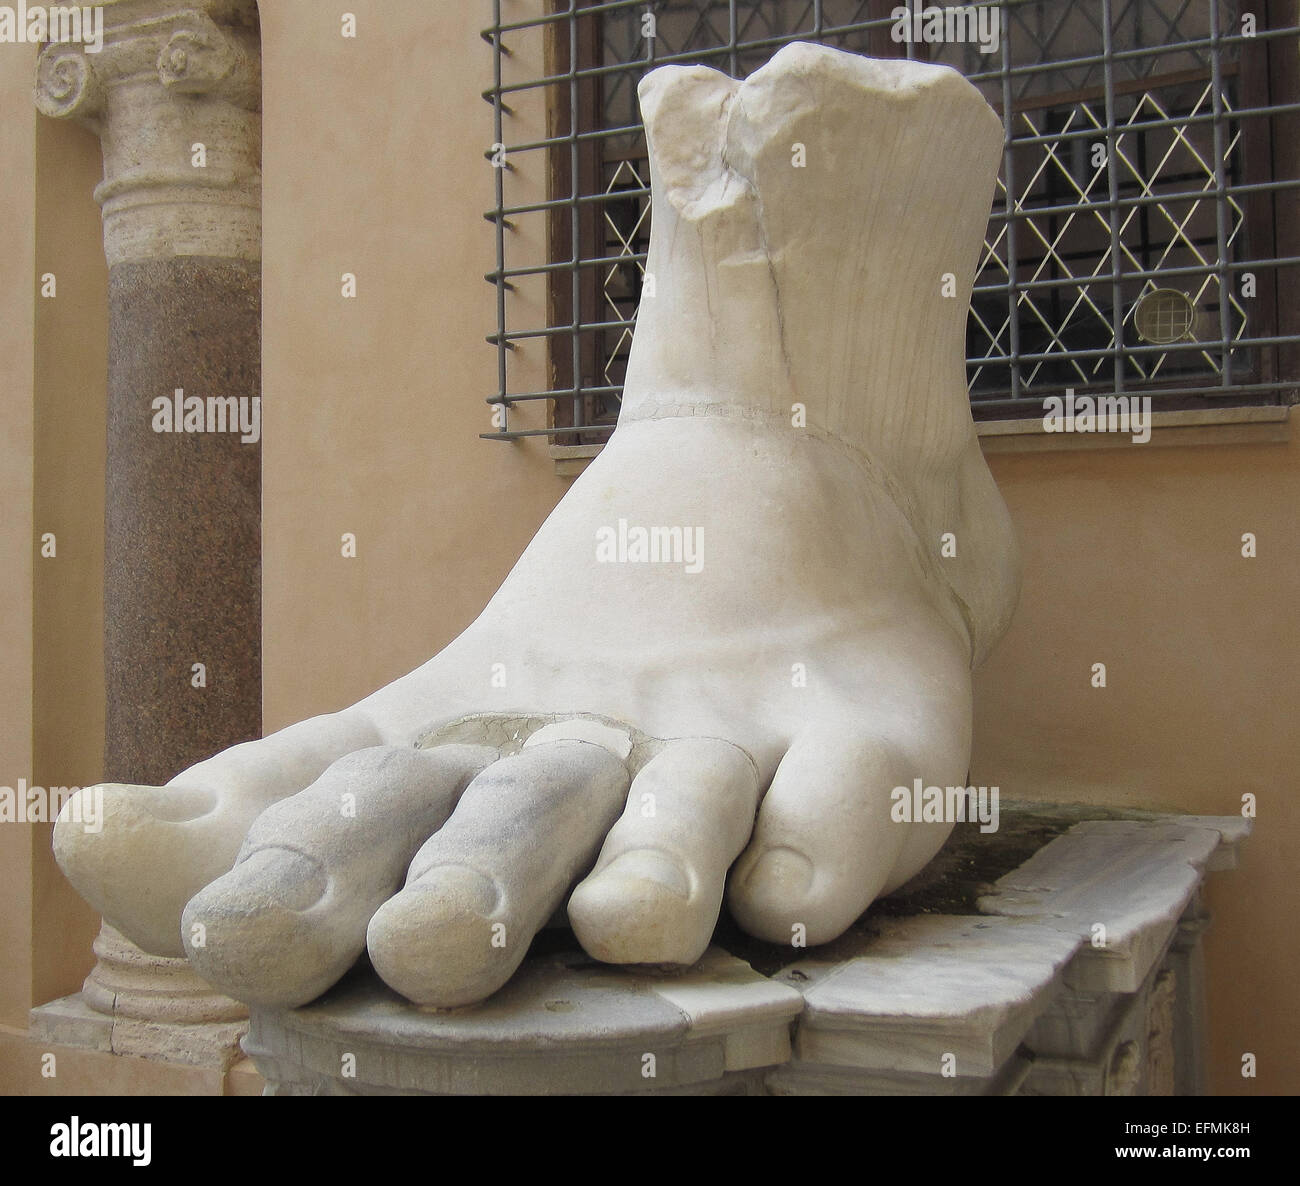 This huge foot was part of the Colossus of Constantine, a huge statue of the Roman Emperor Constantine that once stood in the Basilica of Maxentius, near the Roman Forum in Rome. The foot is carved from marble. The statue dates to after Constantine's great victory over Maxentius at the Battle of Milvian Bridge in A.D. 312. In Late Antiquity, the statue was pillaged for its parts. This foot, hands, and head are now housed in the Capitoline Museum in Rome. The photo dates to March 2014. Stock Photo